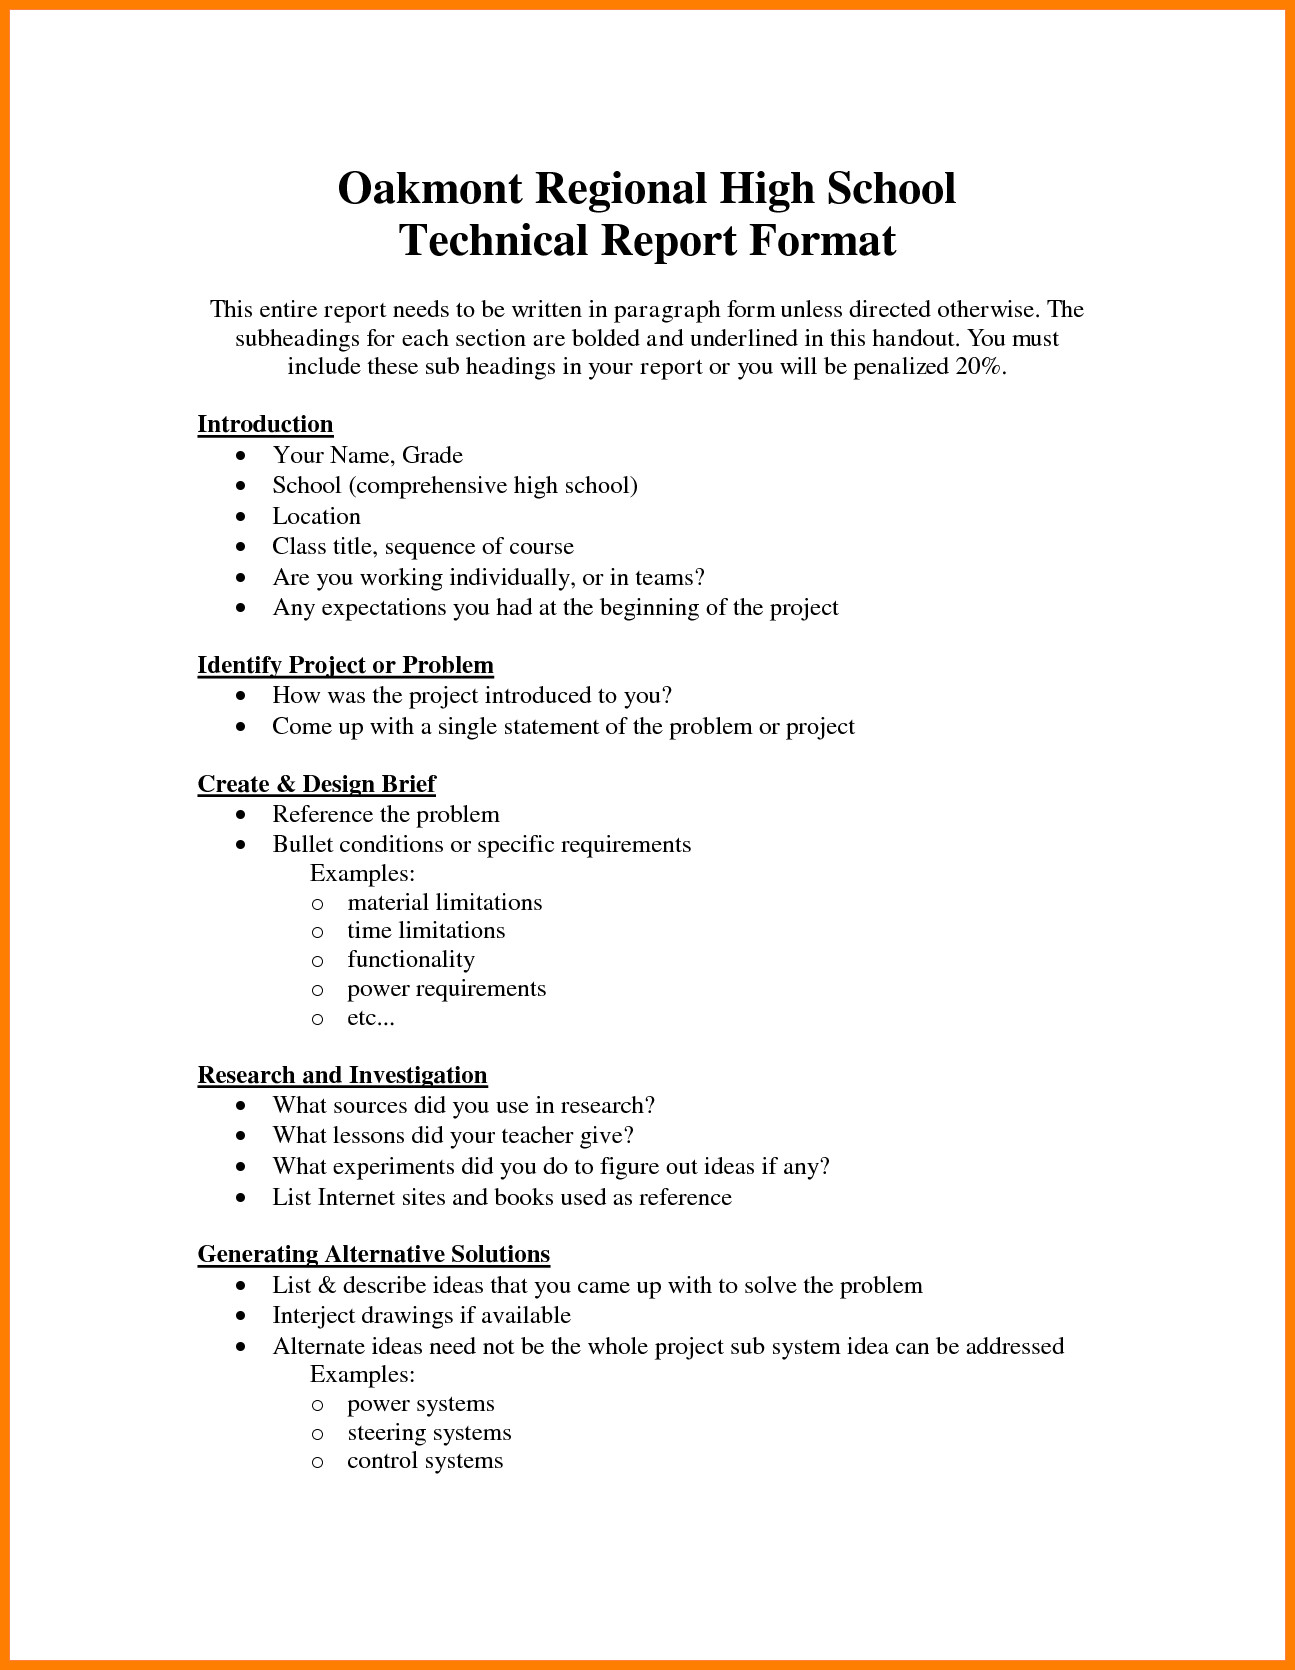 technical report writing topics for information technology